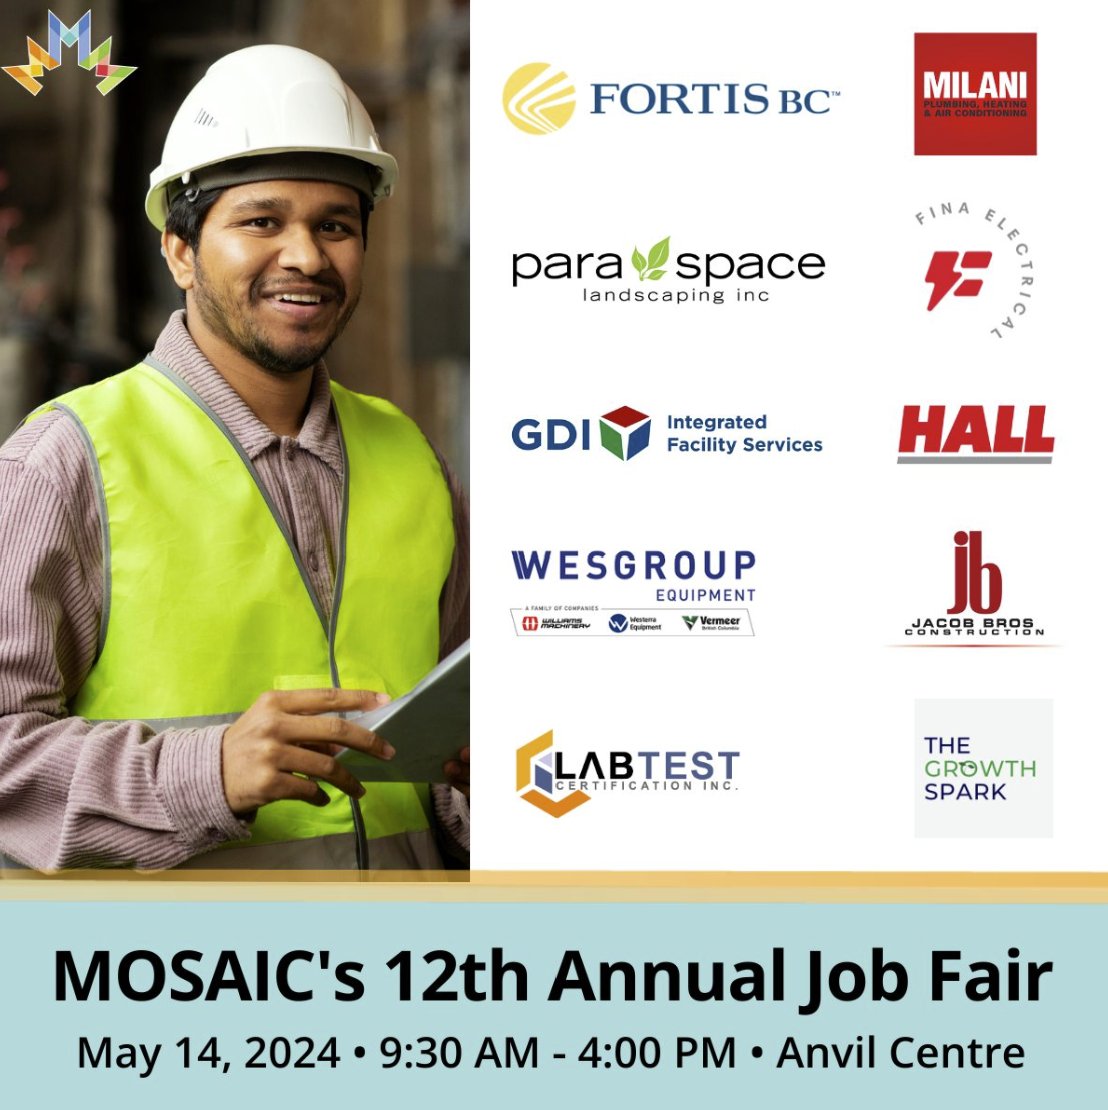 Join us at @MOSAICBC 12th Annual Job Fair on May 14th! We are always looking for talented individuals to join our team. To register, visit jobfair.mosaicbc.org. We look forward to seeing you there! #JobFair #JobOpportunities #Employment #Careers #JobSearch #Engineering #Sales